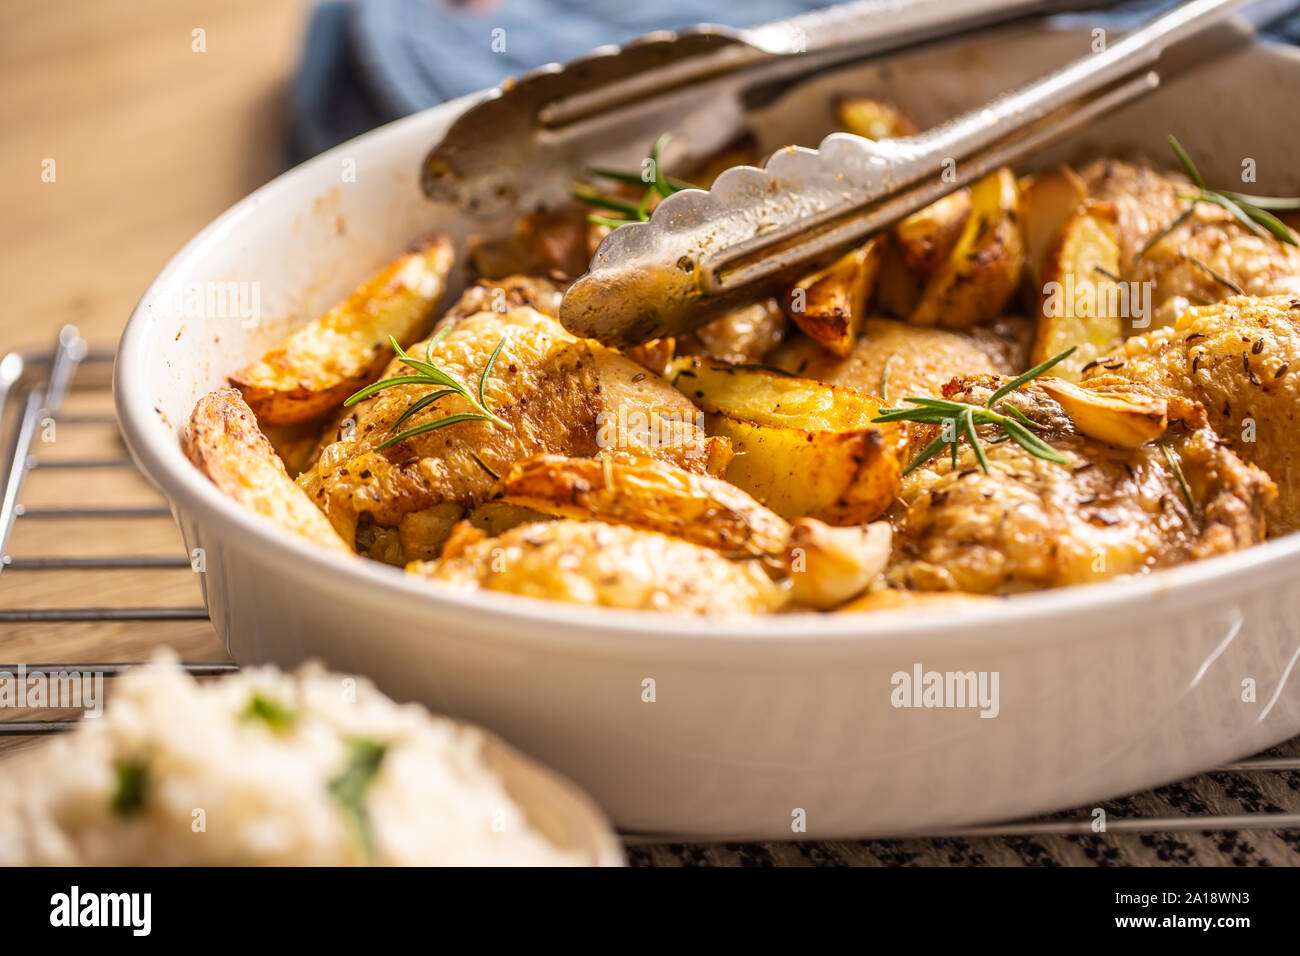 Chicken legs roasted with american potatoes in baking dish Stock Photo